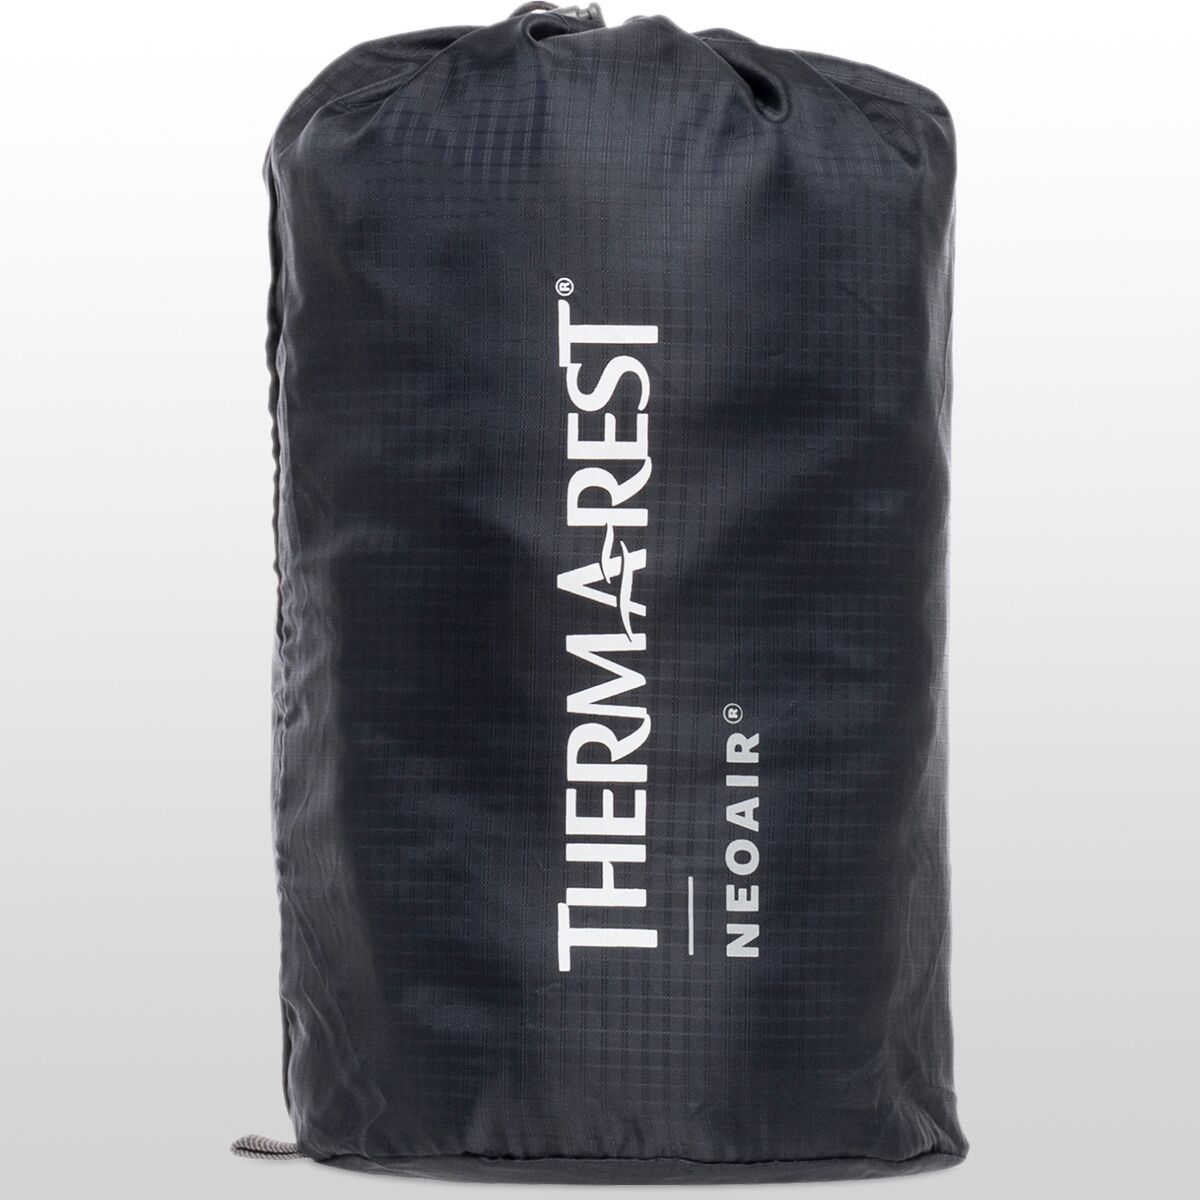  Therm-a-Rest NeoAir XTherm Sleeping Pad - Hike & Camp